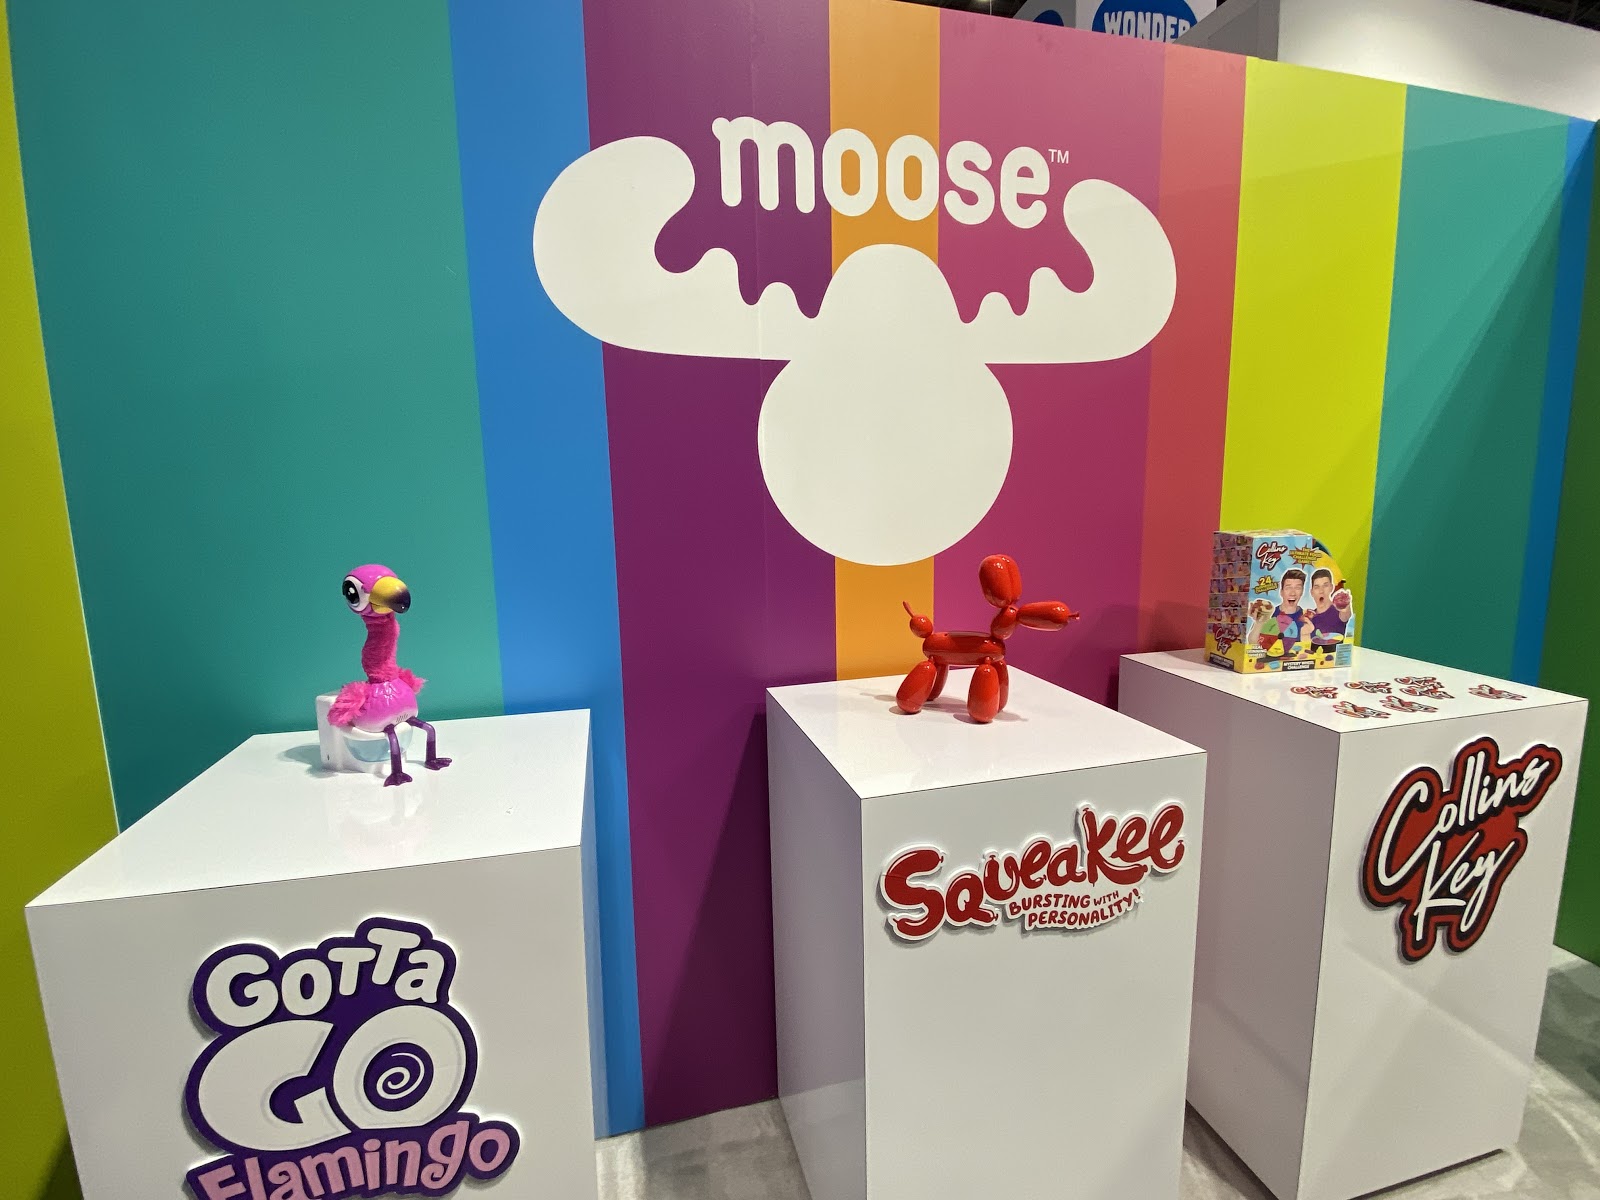 Goo Jit Zu - New Stretchy Toys from Moose at Toy Fair 2021 